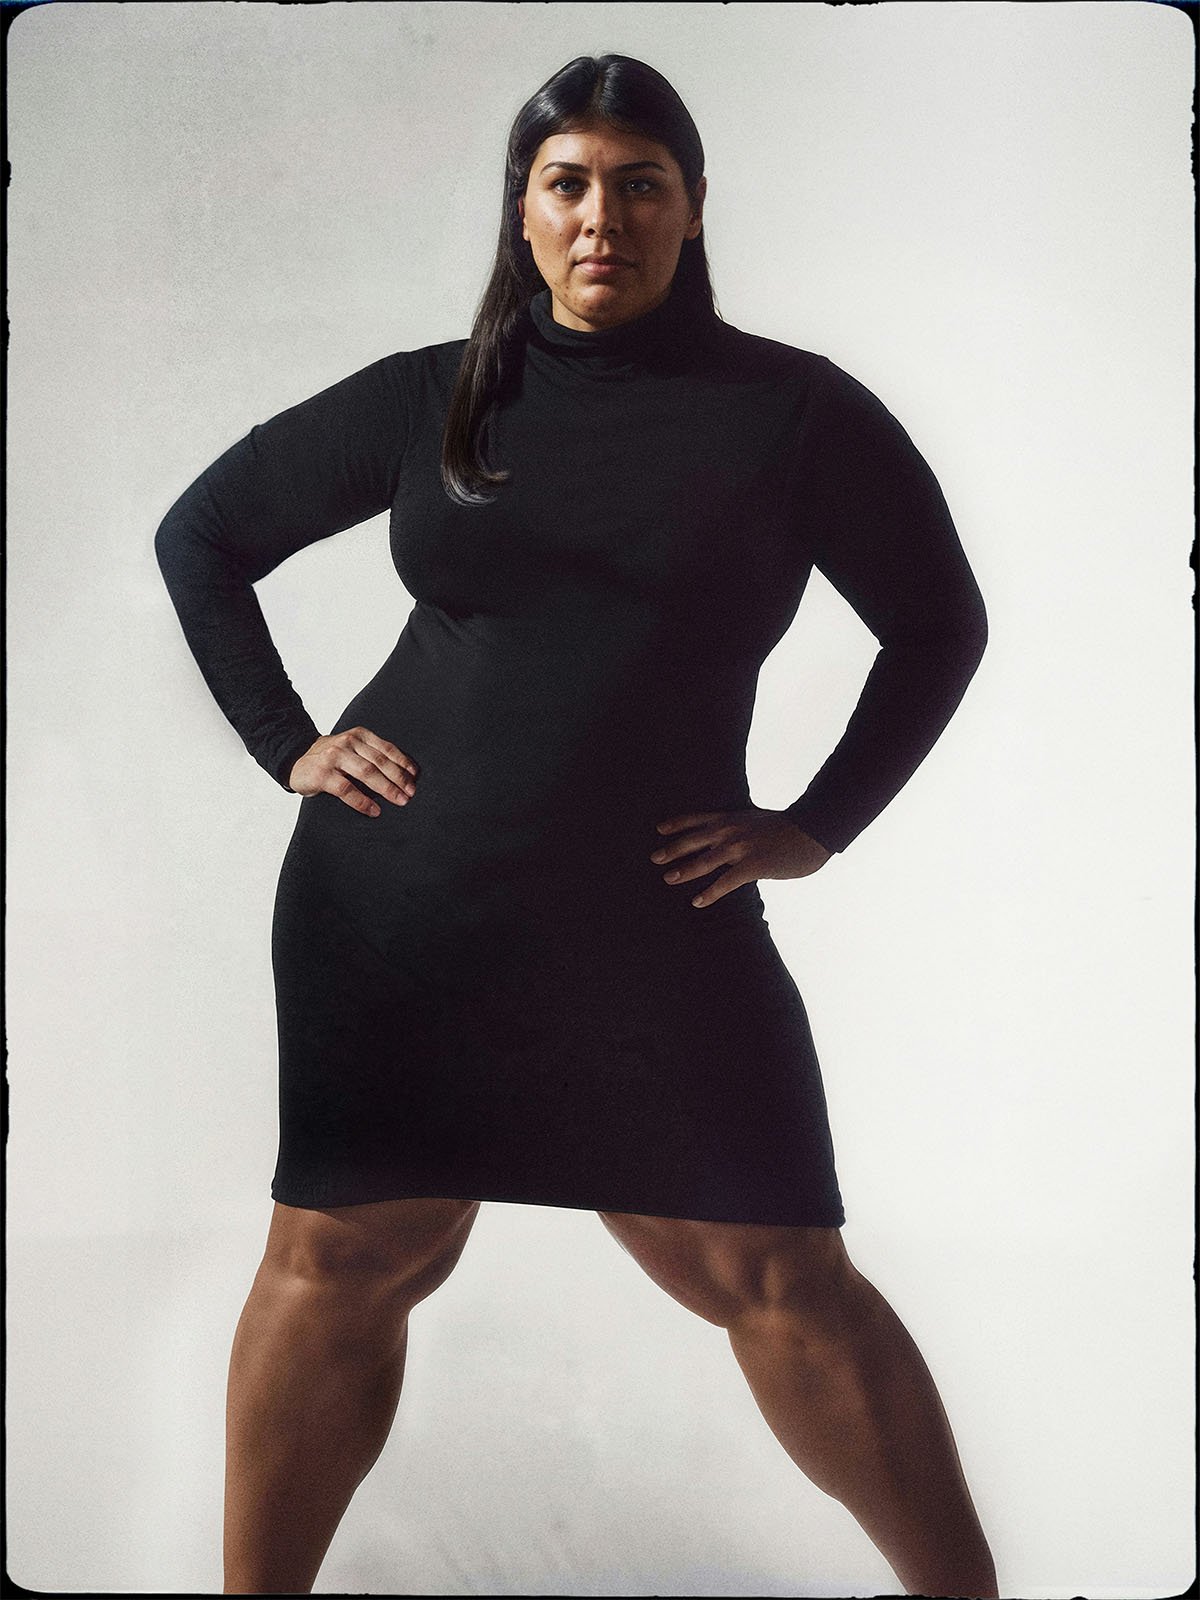 A confident woman in a black turtleneck dress stands with hands on her hips against a light grey background. her expression is assertive and poised.